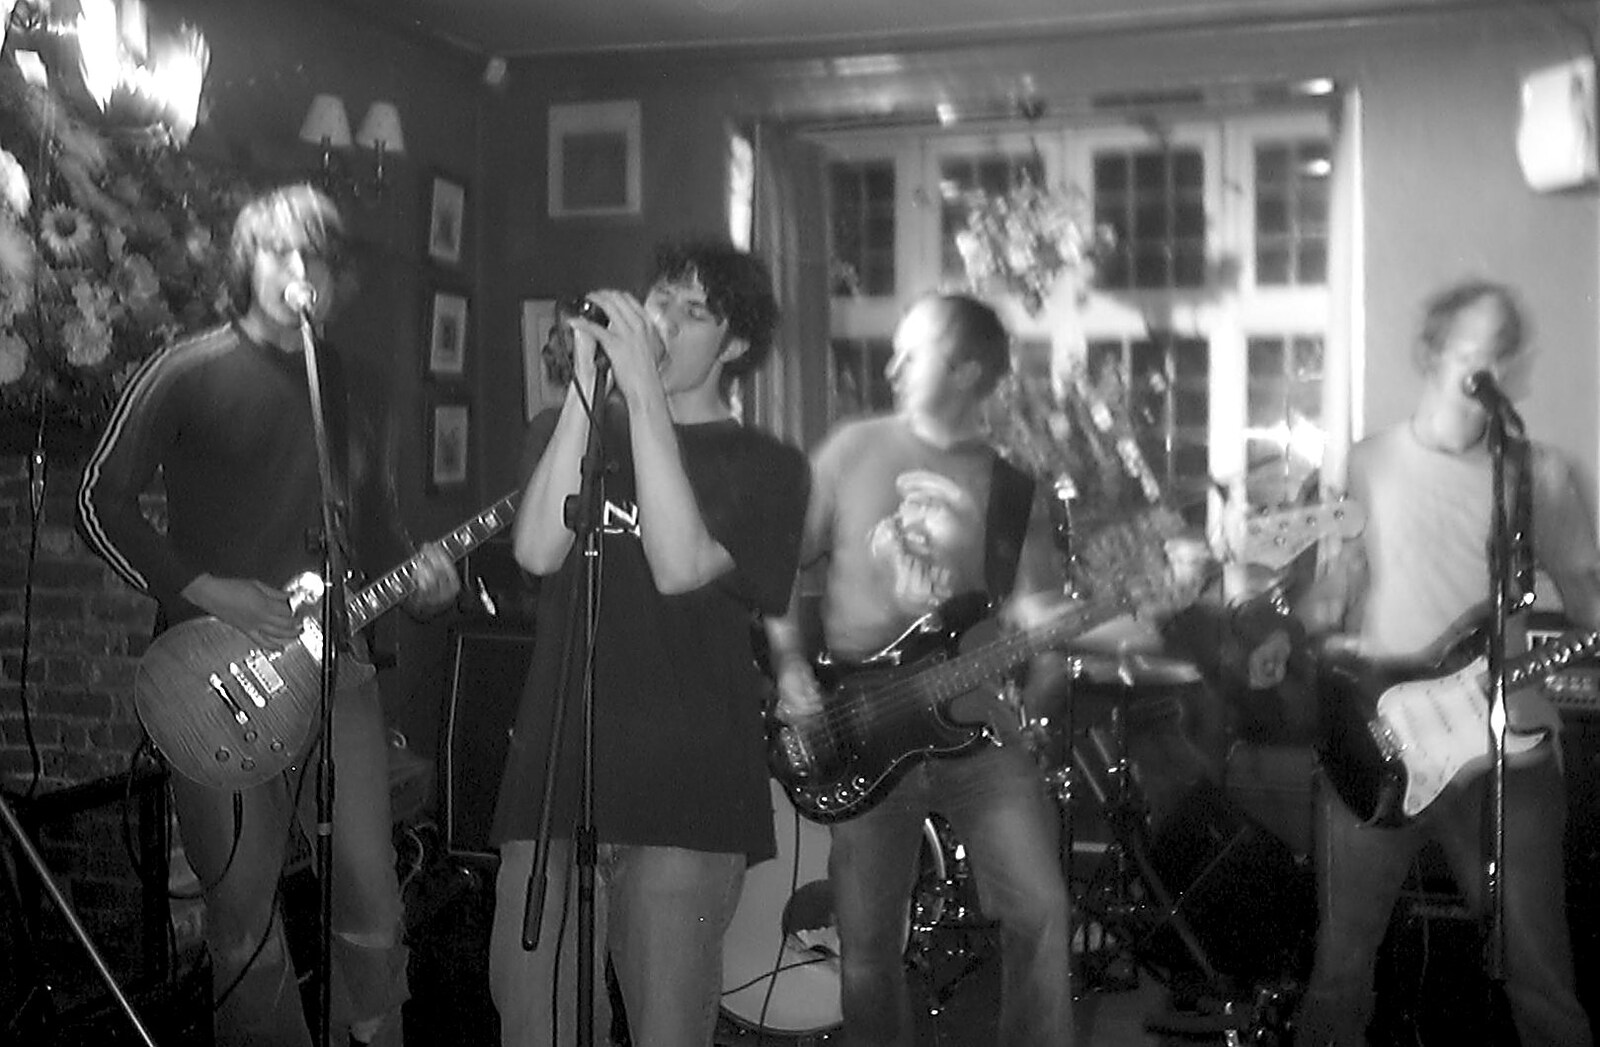 The band does its thing from Mark Joseph at Revs, and the BSCC at Hoxne and Wortham - 30th September 2004